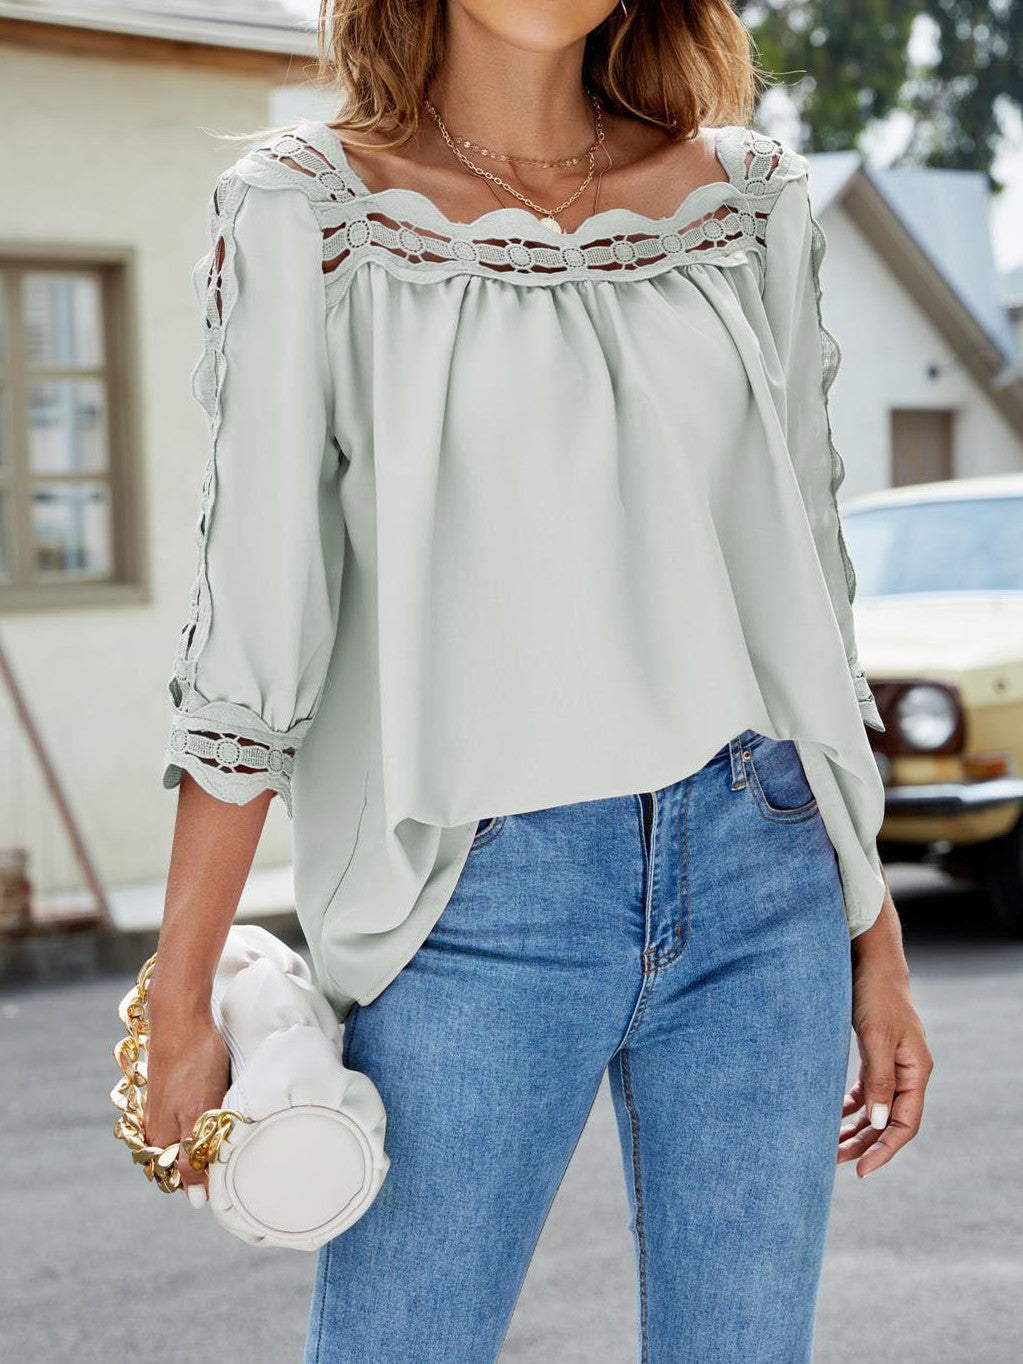 Lace Panel Square Neck Loose Casual Half Sleeve T-Shirt